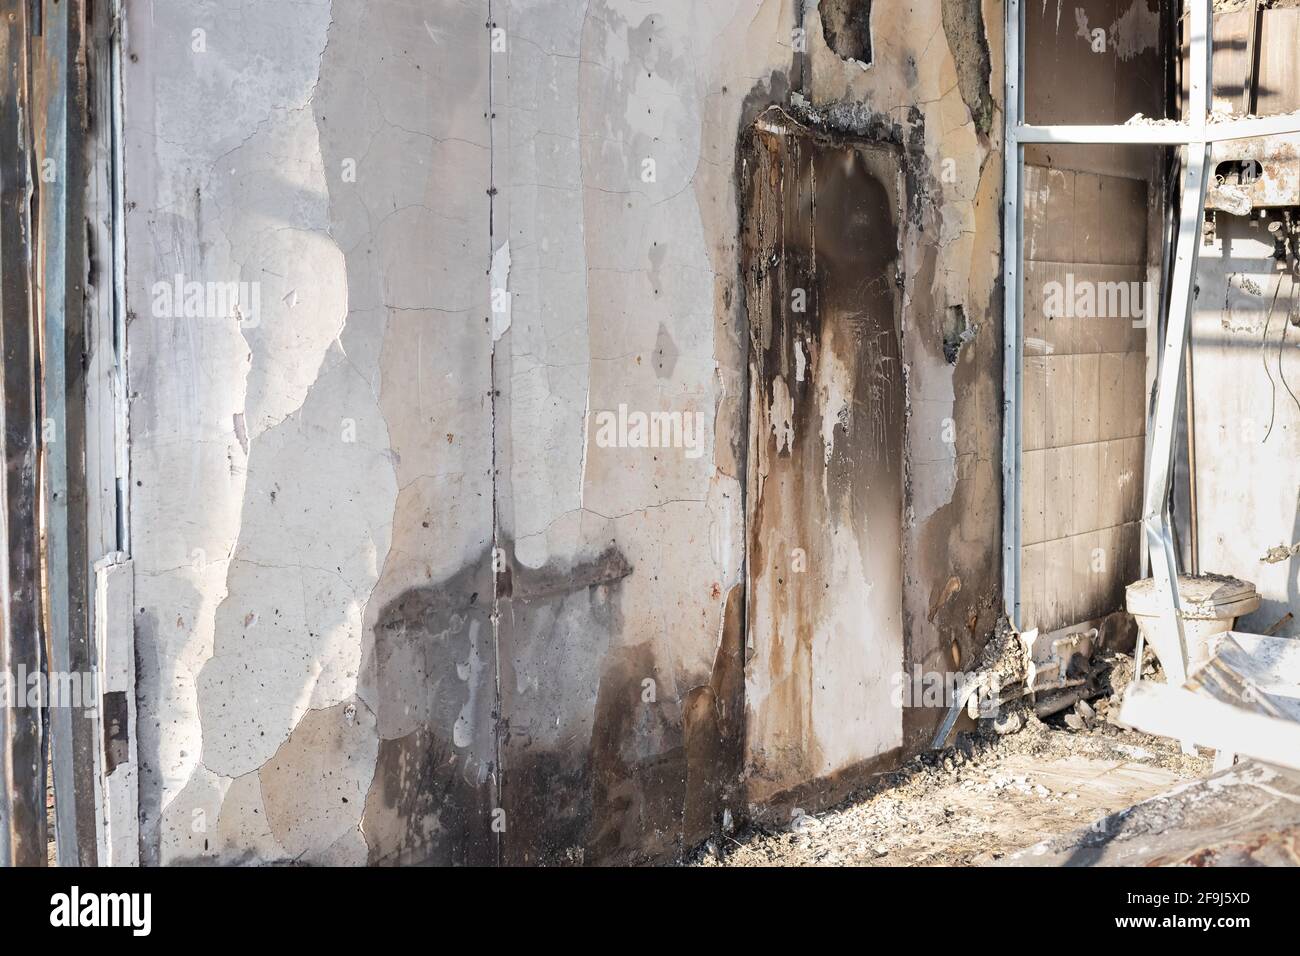 damaged wall with traces of burning and black soot in building after fire. arson investigation. horizontal image. side view. Stock Photo